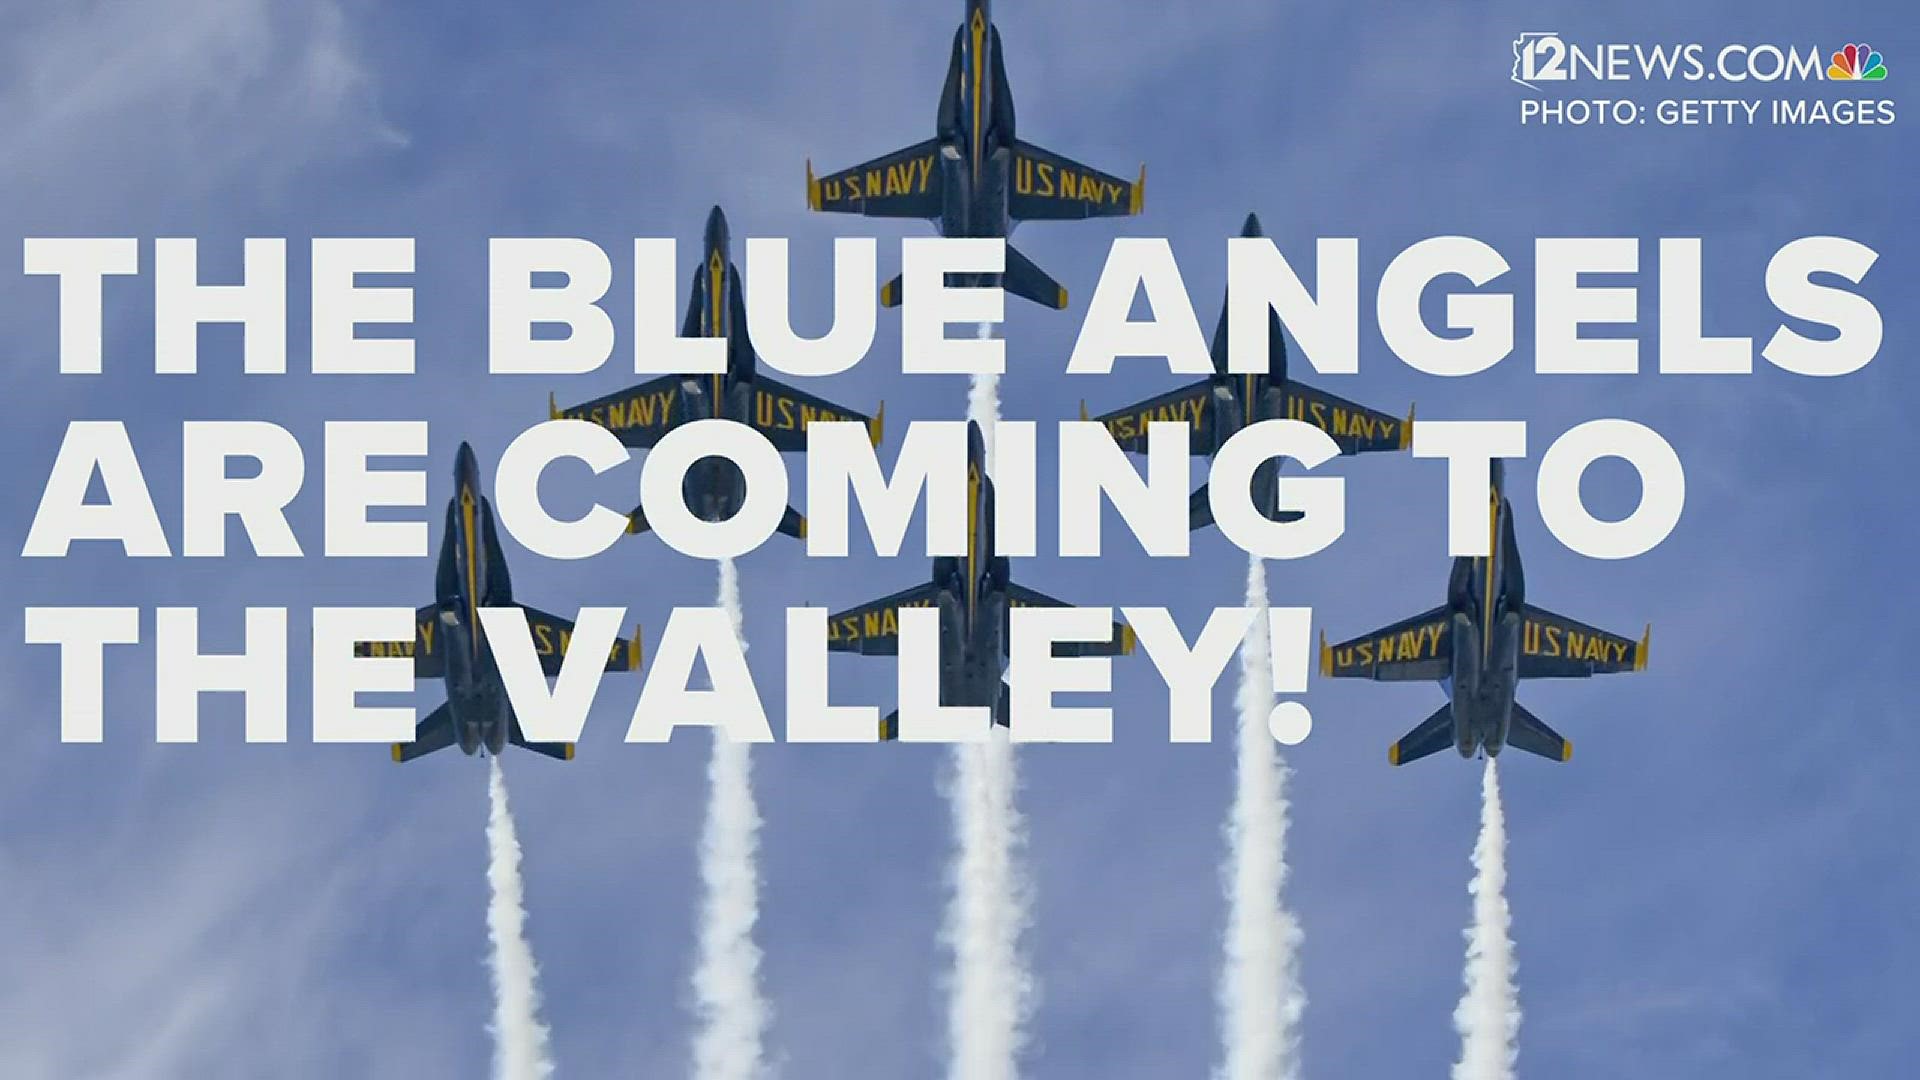 The Blue Angels are back! Luke Air Force Base is opening to the public for its Luke Days air show, now set for March 17 - 18, 2018.